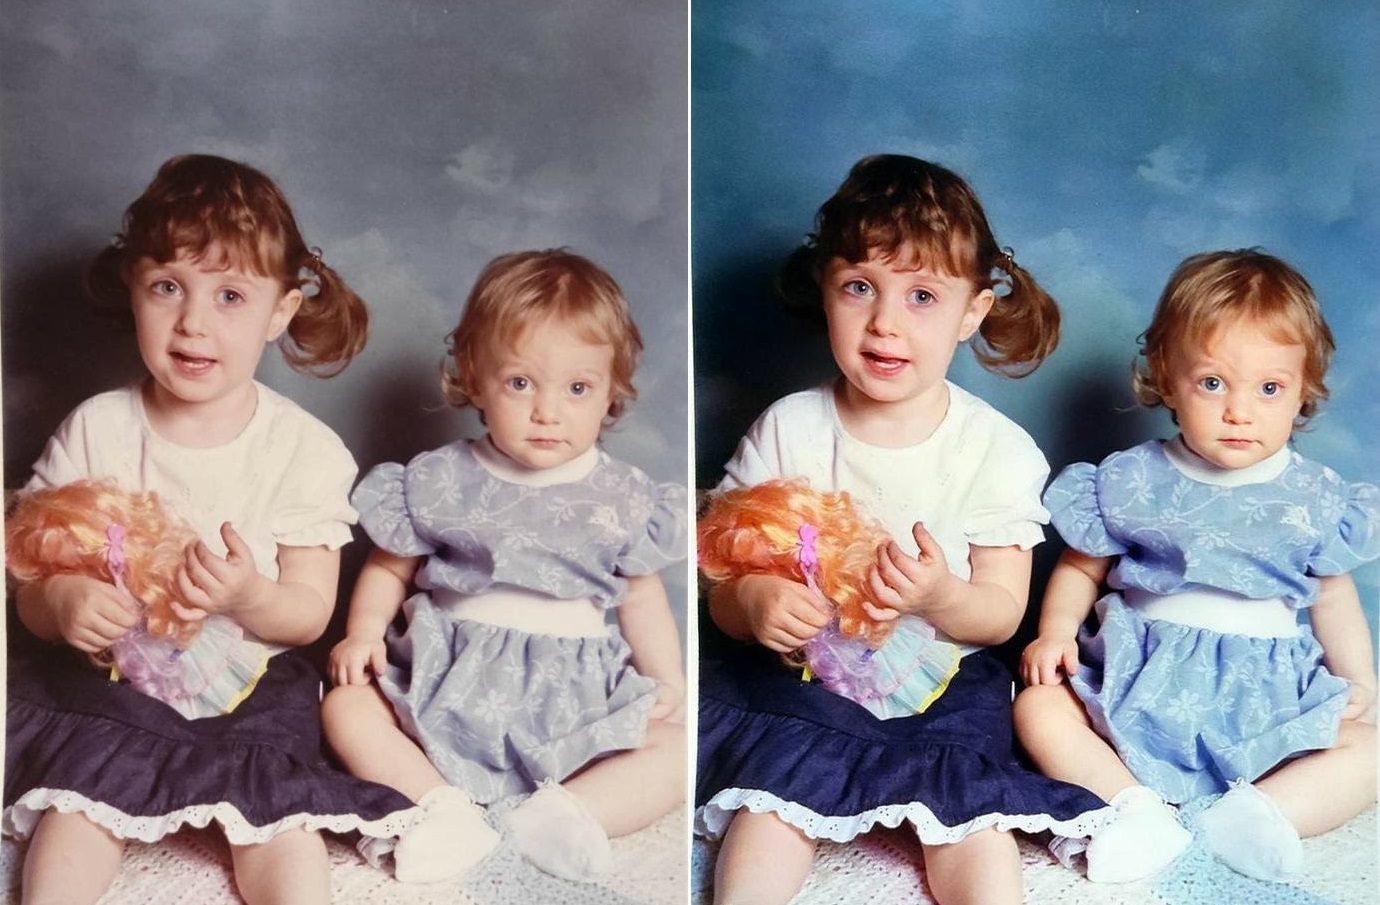 Left: a pair of sisters, New York, circa 1988. Right: color-restored result.